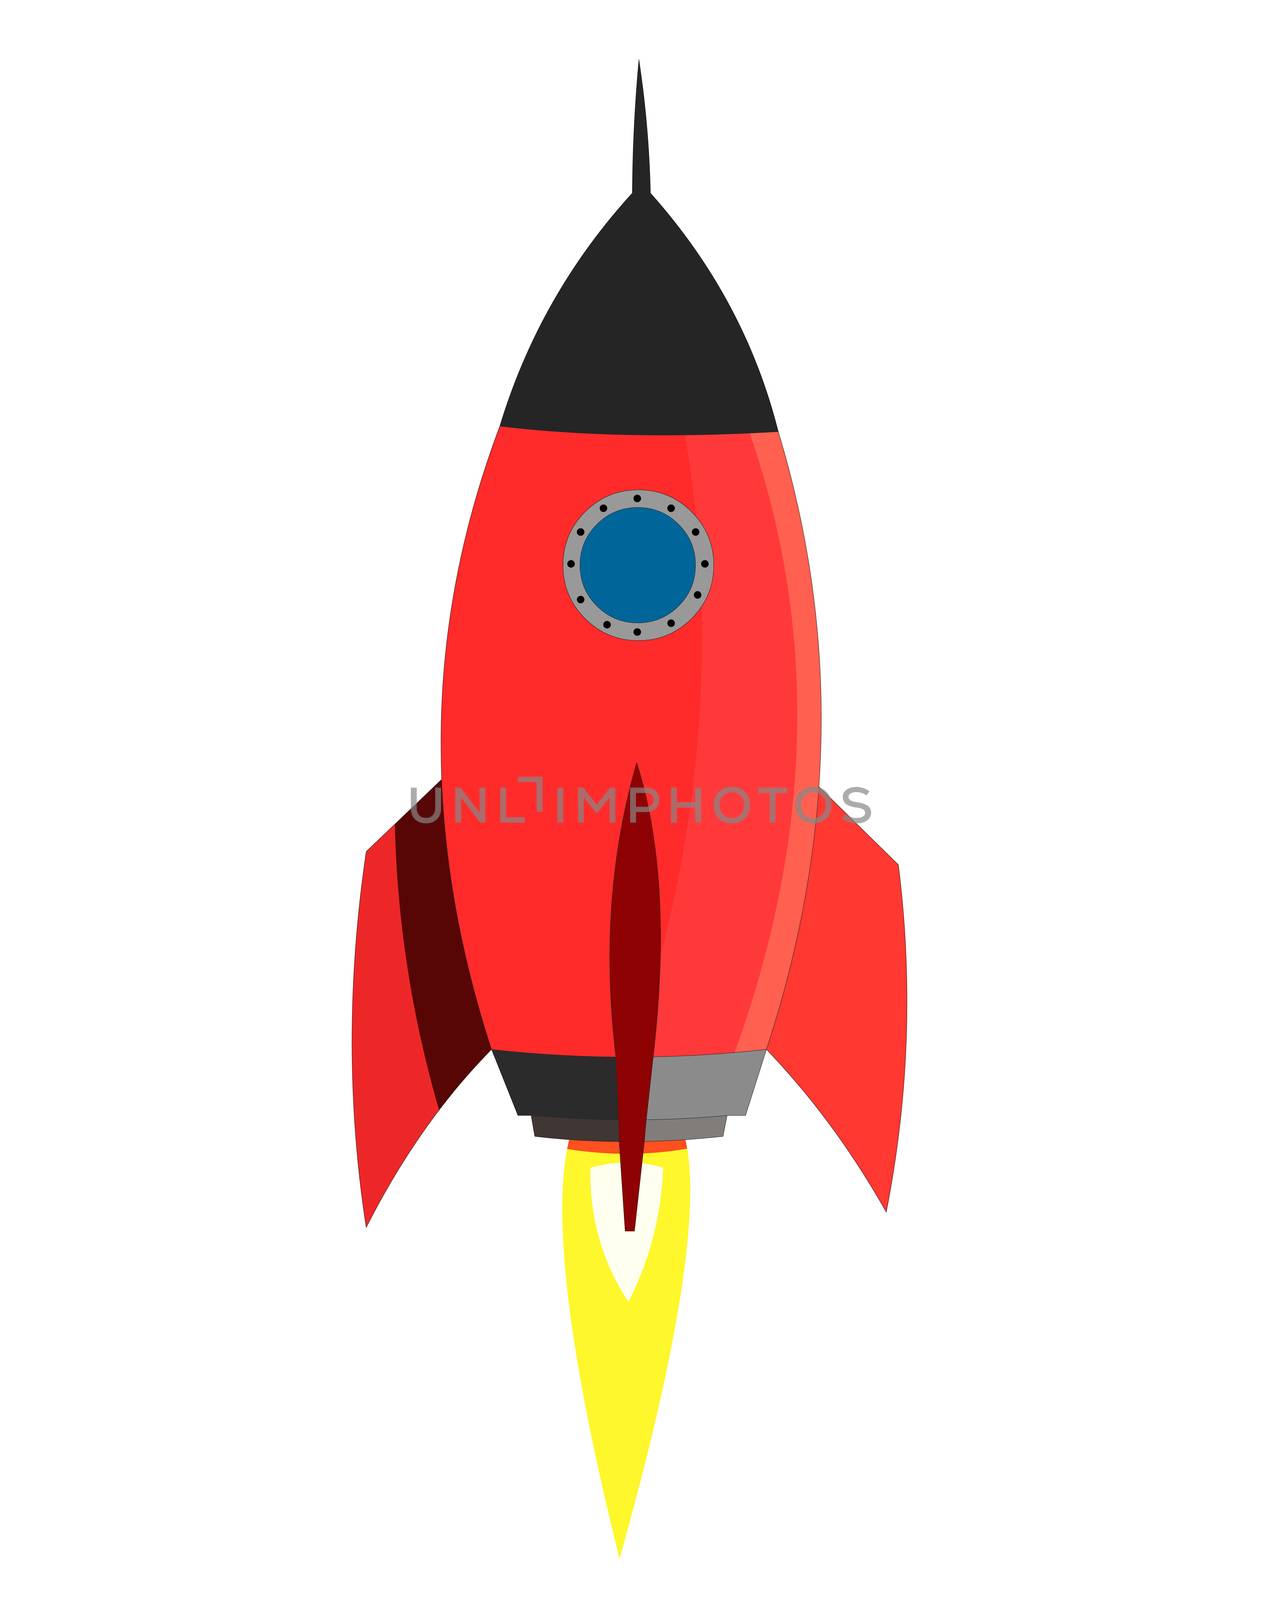 A large red rocket with a round windows blasting off with flames.